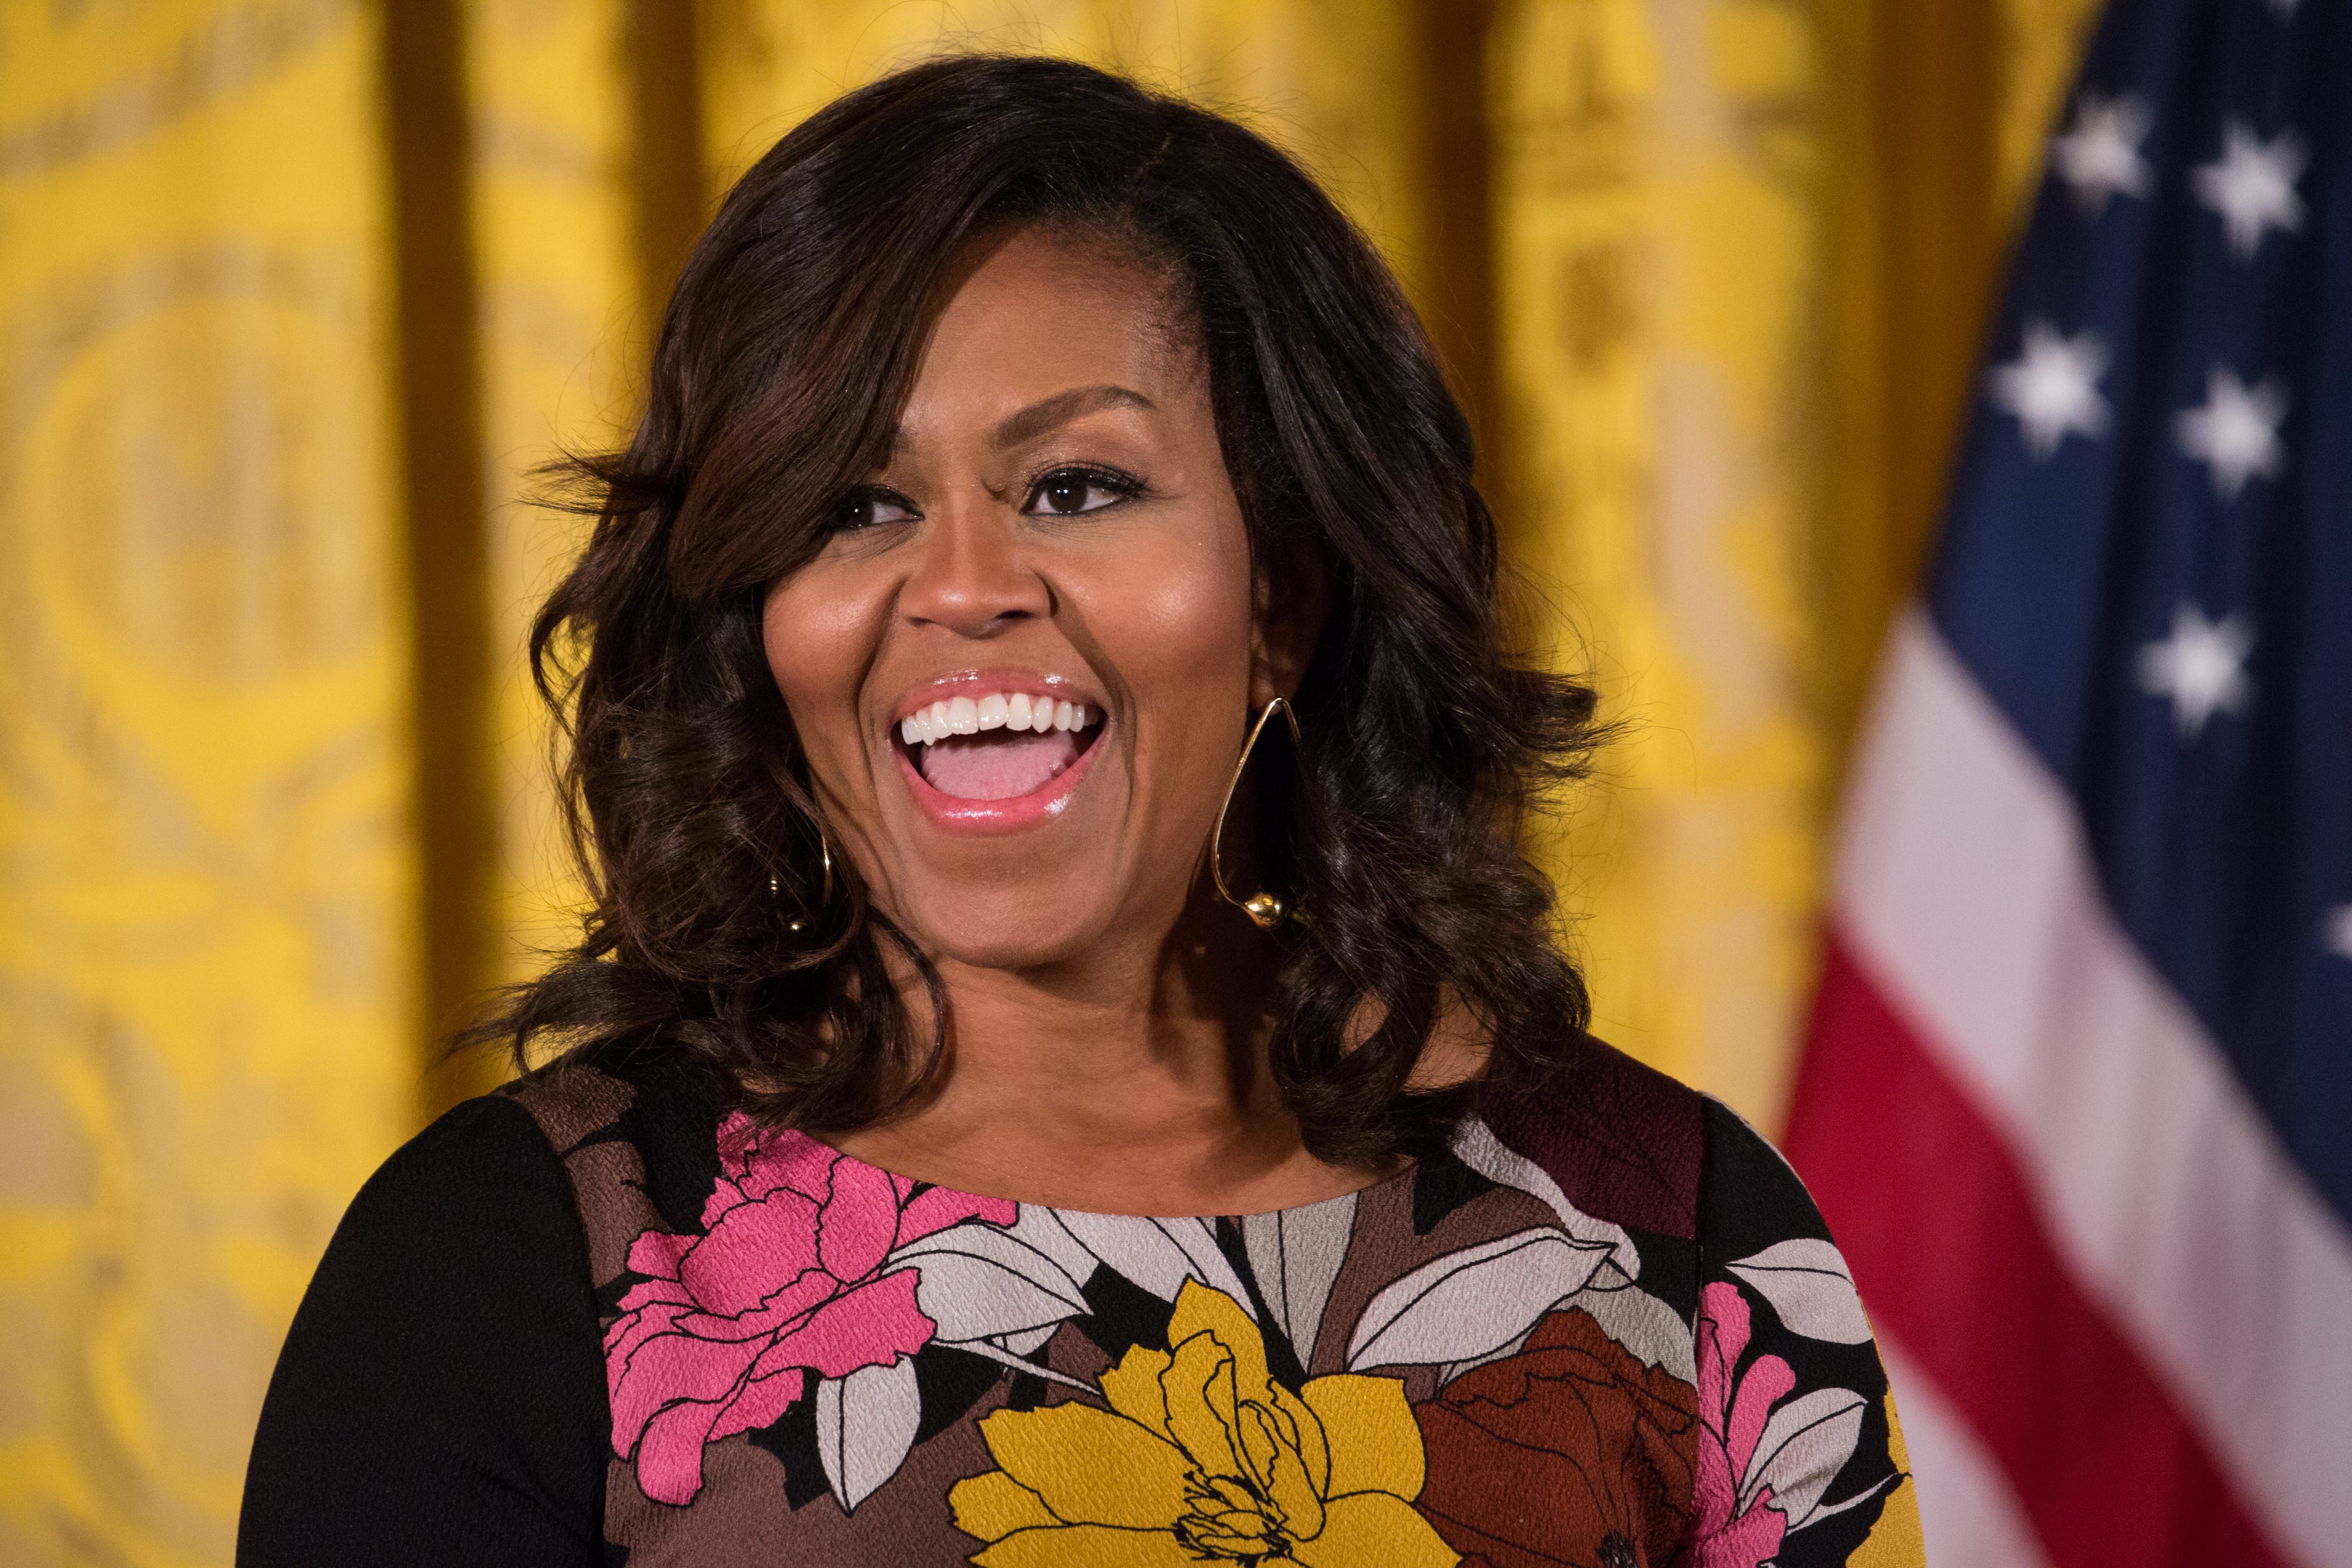 15 Beauty Shots Of Michelle Obama That Remind Us Why She’s The Baddest FLOTUS